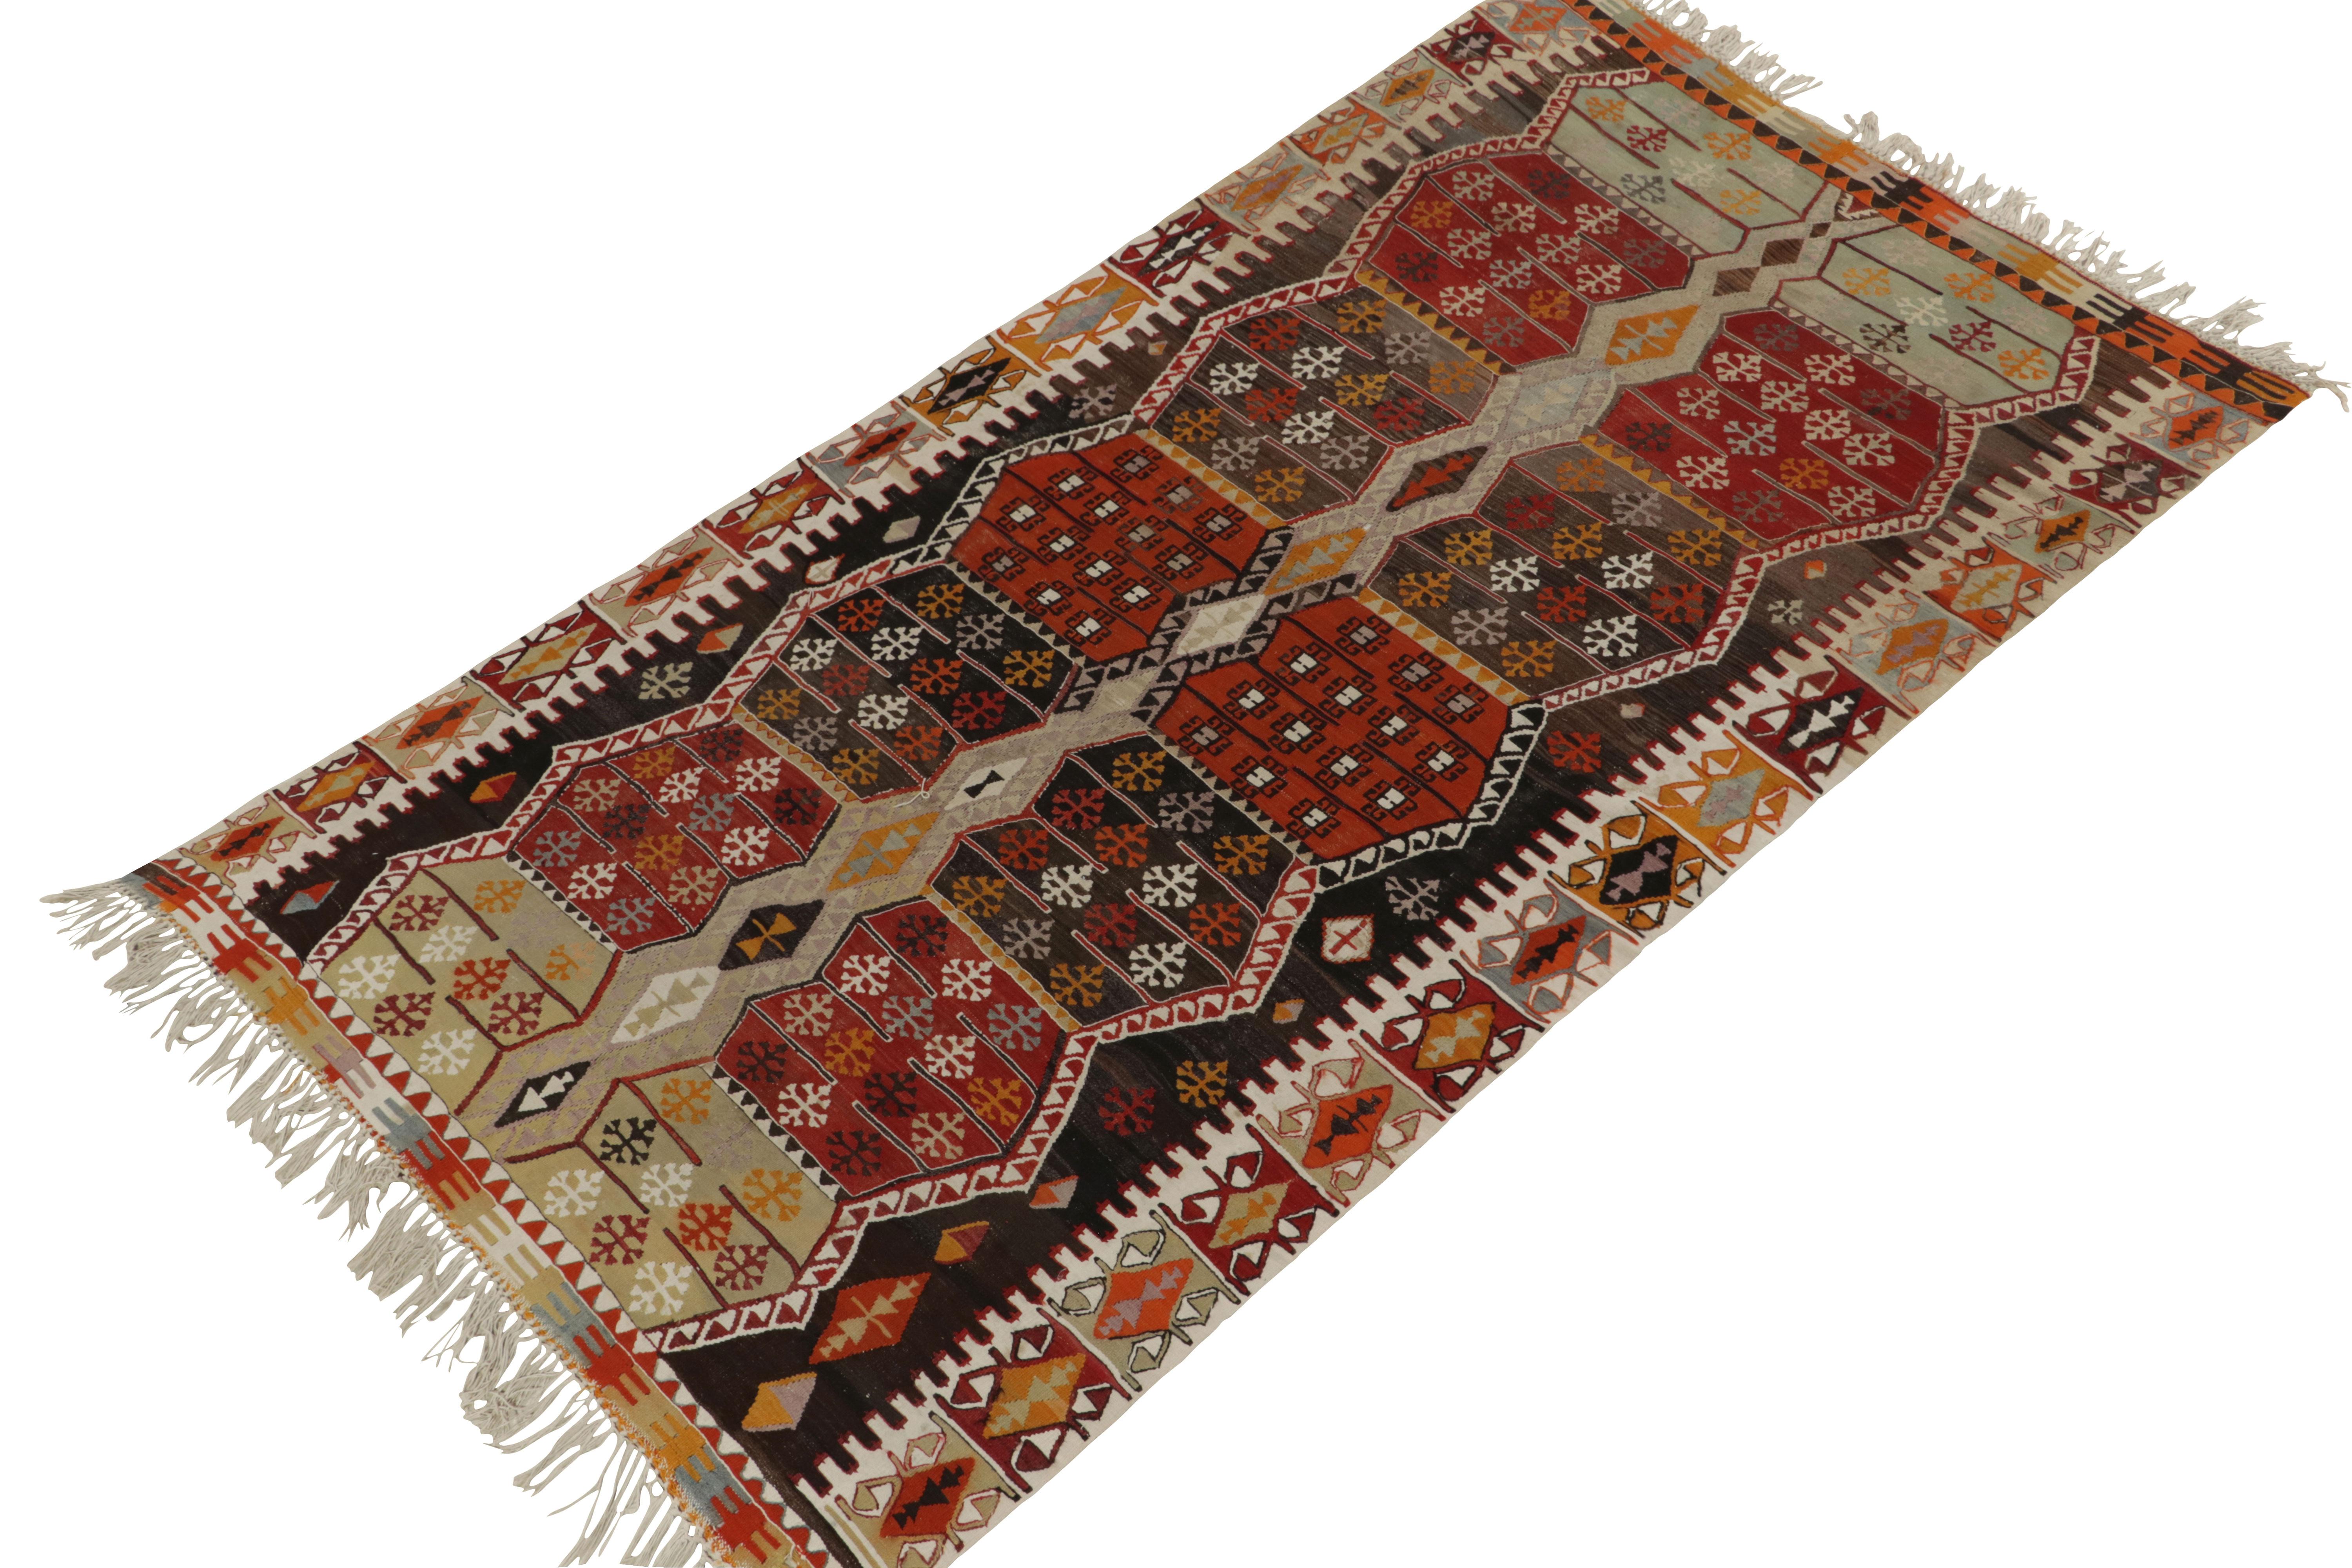 Originating from Turkey circa 1930-1940, a handwoven antique kilim rug enjoying a tribal pattern work. The piece carries a vivacious personality with a bright colorplay of gold-orange, red & gray against beige-brown—a marriage of both traditional